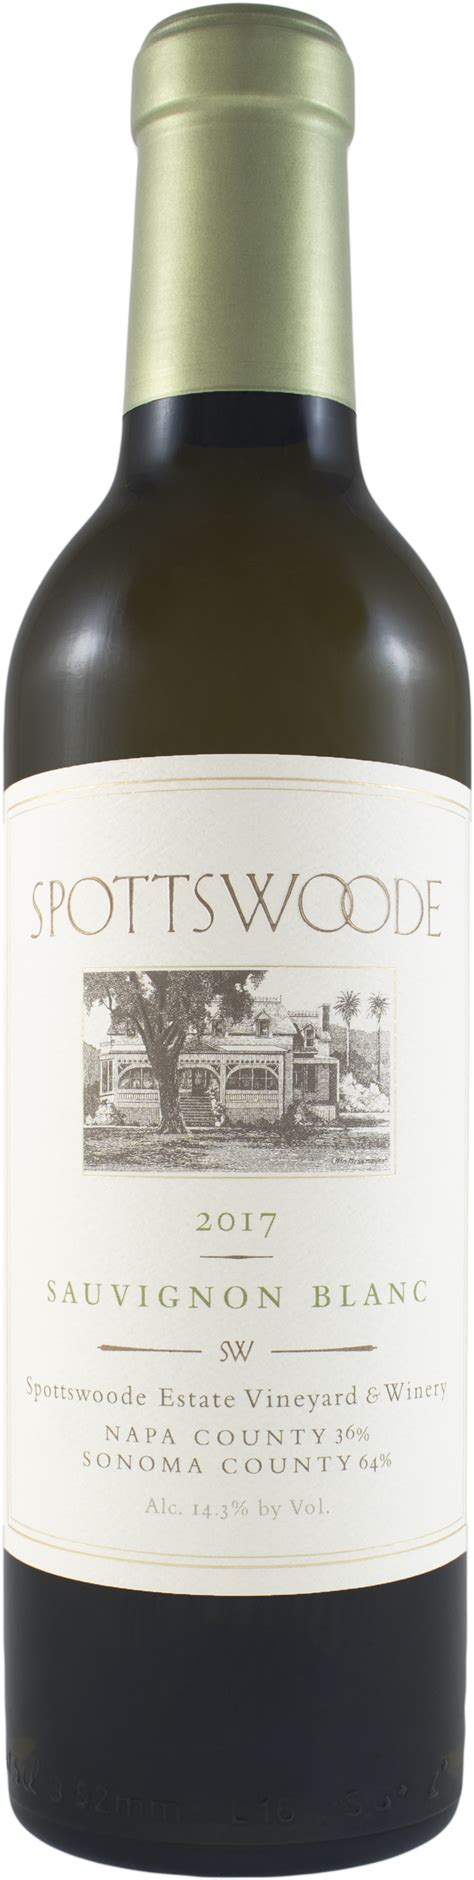 Auntsfield estate aims to produce a distinctive style of sauvignon blanc, defined by a riper flavor spectrum and textural palate (both derived from the rich clay soils of the vineyard) with an underlying. 2017 Spottswoode Sauvignon Blanc | Wine Library